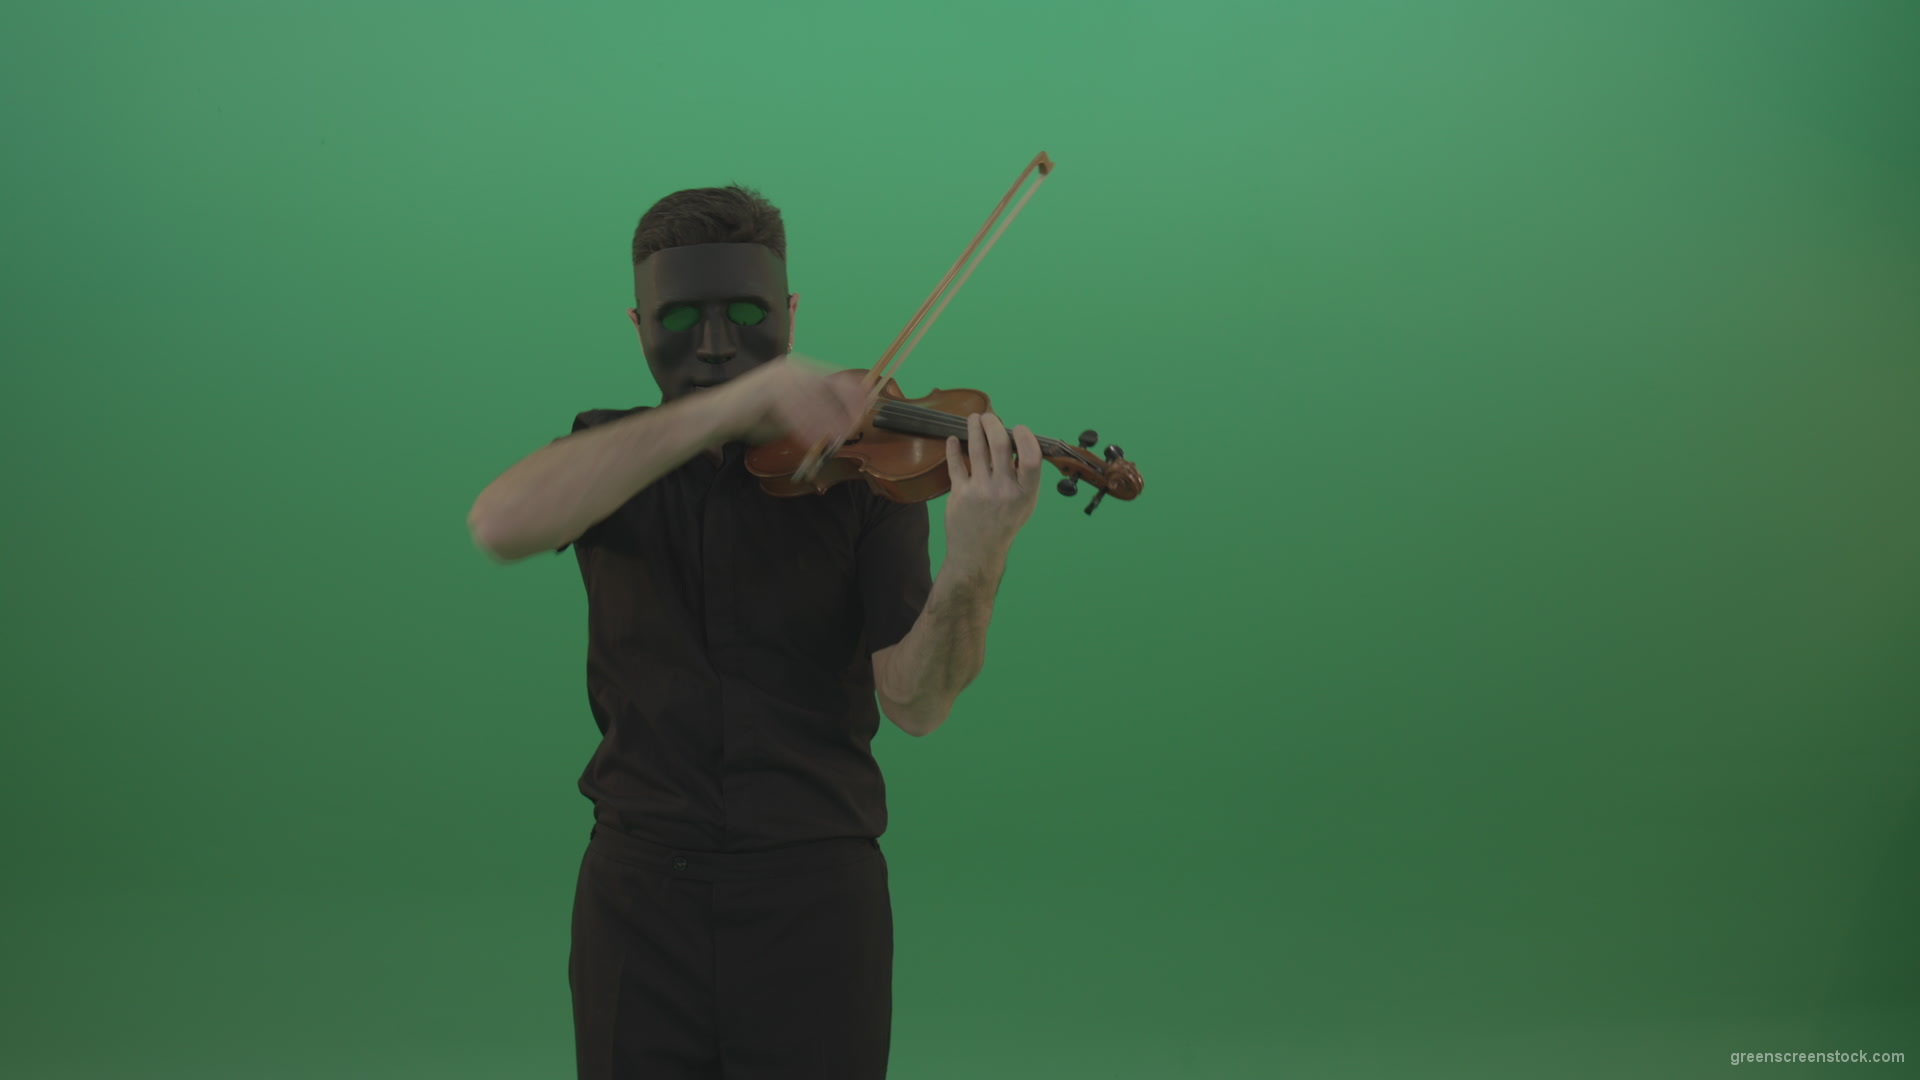 Man-in-black-shirt-and-mask-fast-play-violin-fiddle-strings-gothic-music-isolated-on-green-screen_005 Green Screen Stock